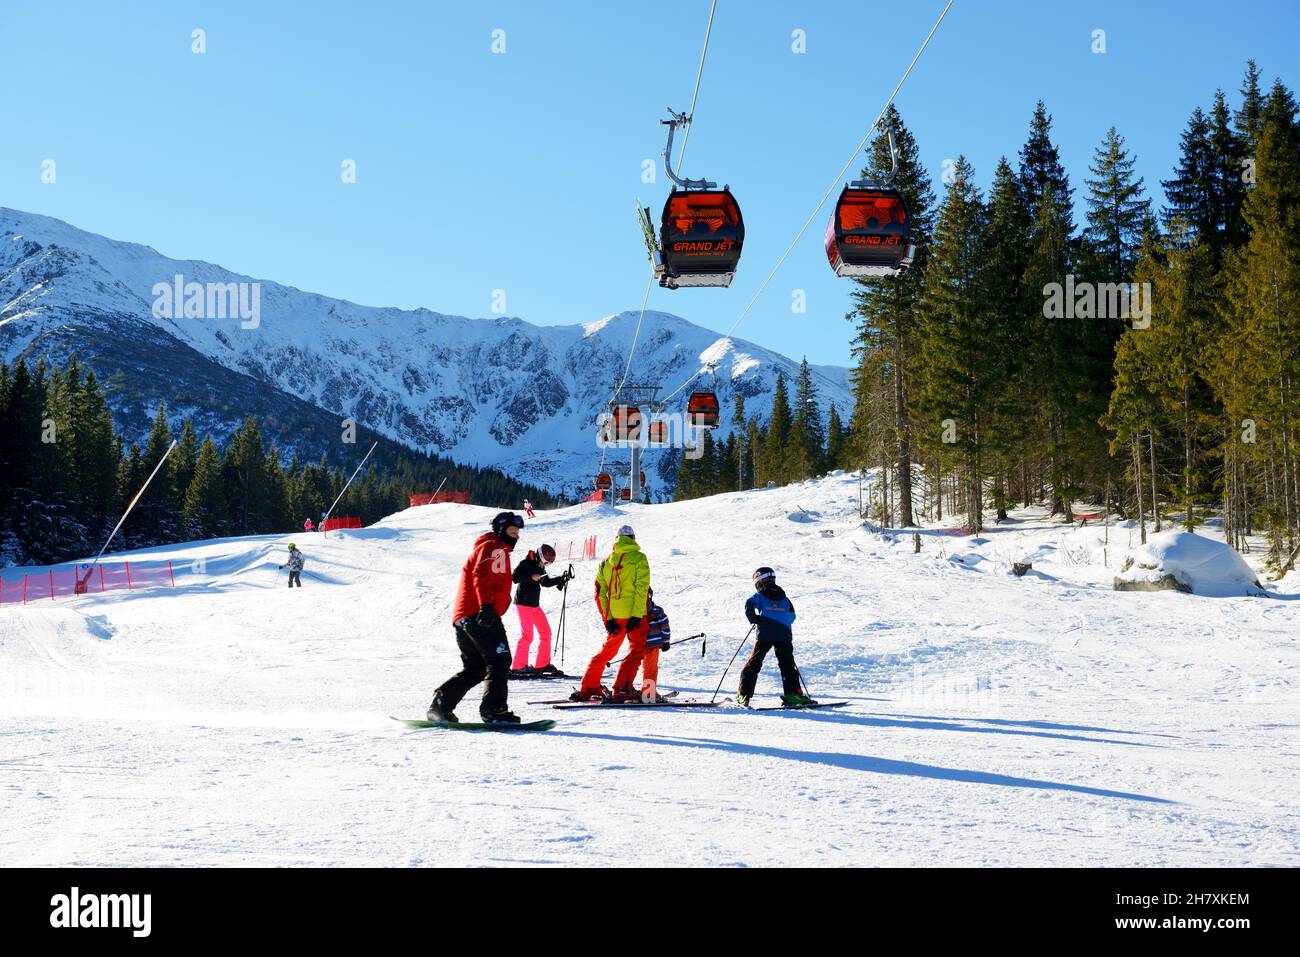 JASNA, SLOVAKIA - JANUARY 22:  The snowpark, skiers and cableway in Jasna Low Tatras. It is the largest ski resort in Slovakia with 49 km of pistes on Stock Photo